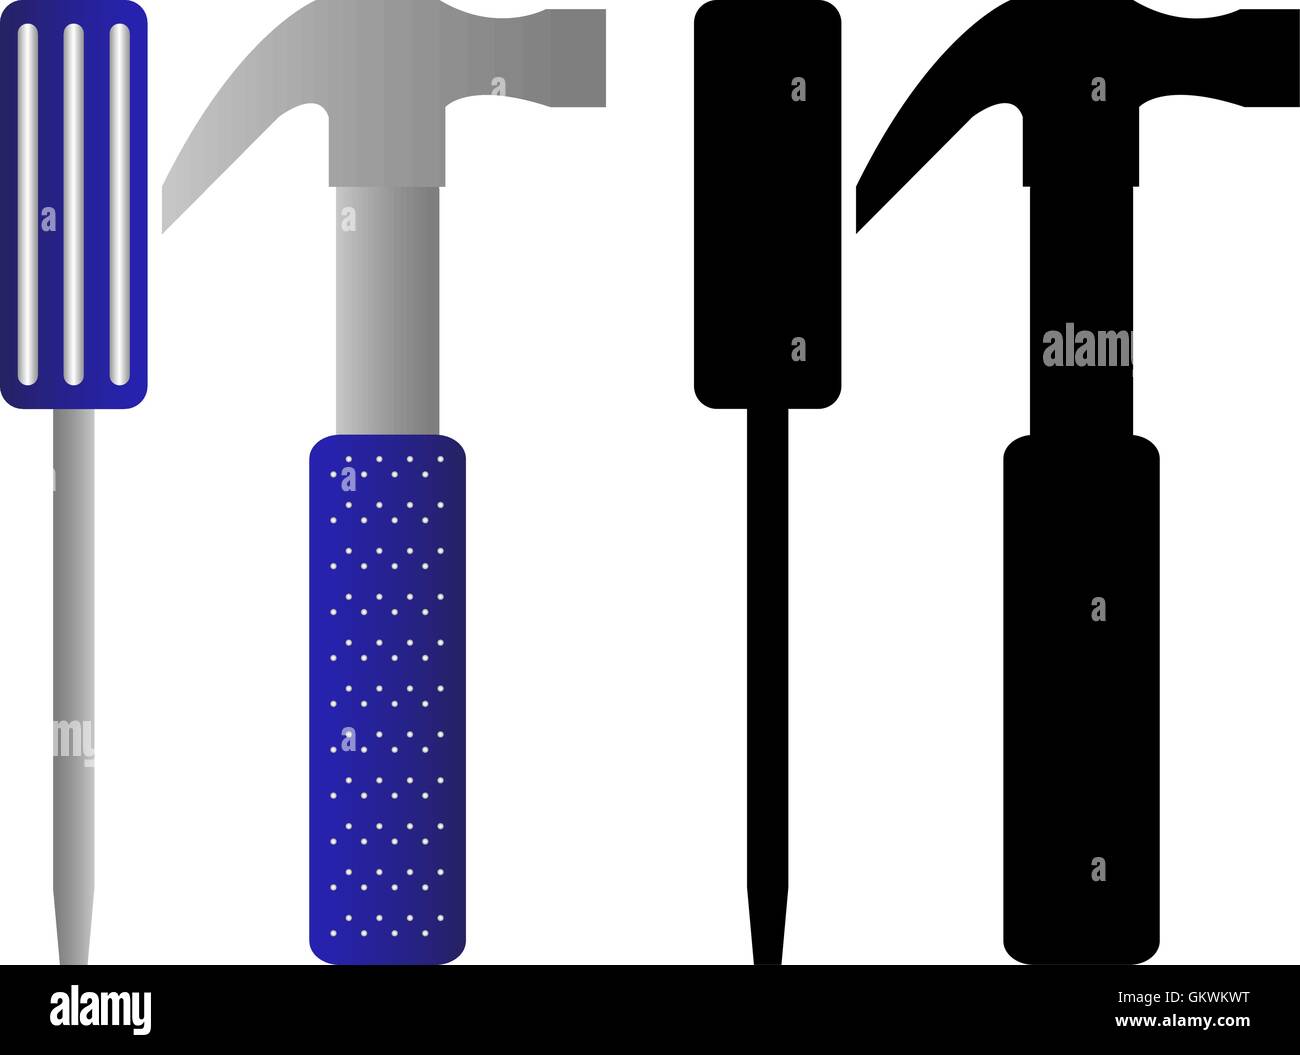 Hammer and Screwdriver Set Stock Vector